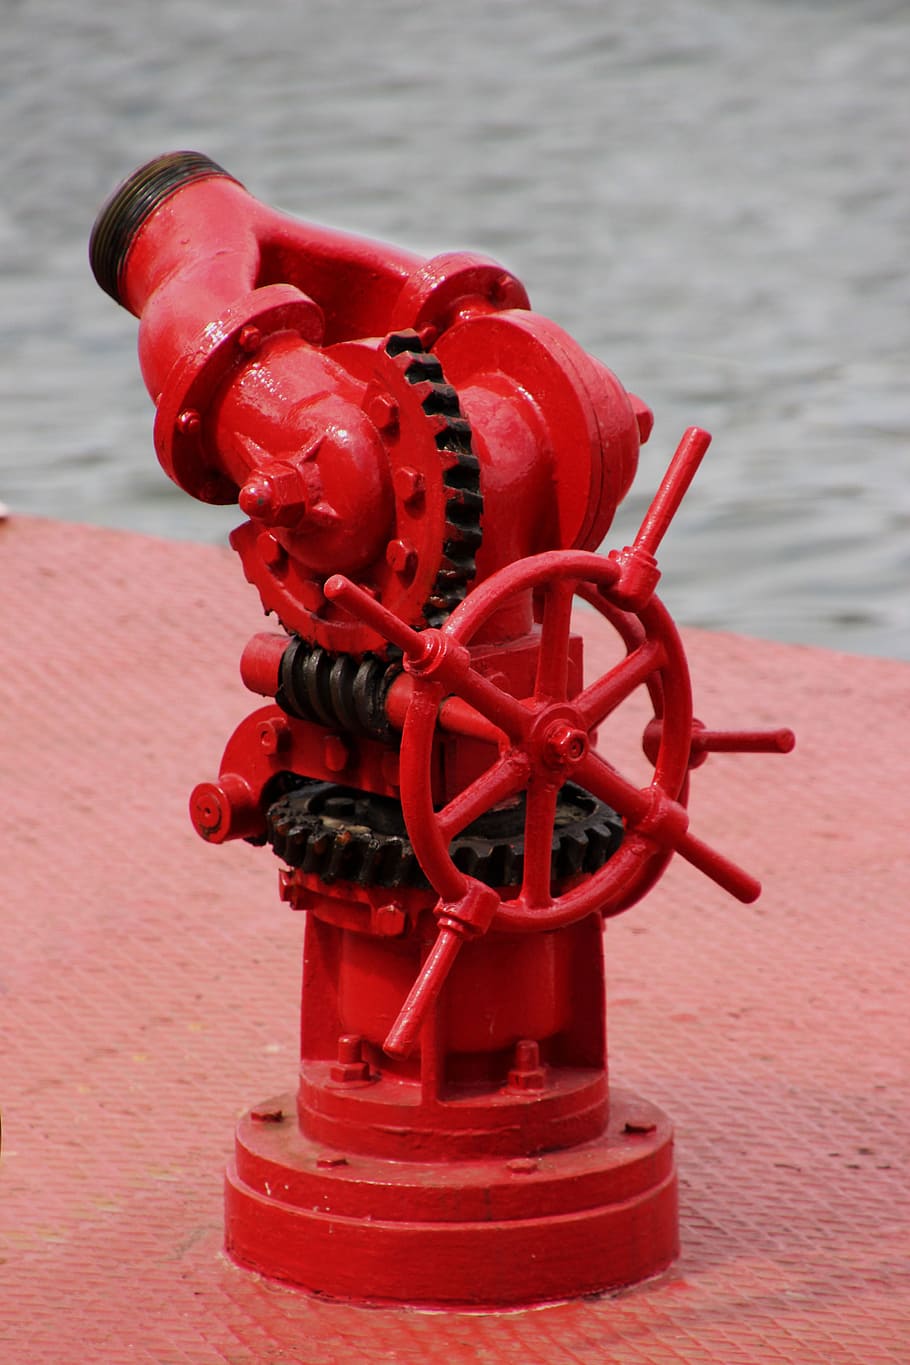 fire hydrant, red, fire, hydrant, water, safety, emergency, protection, metal, pressure